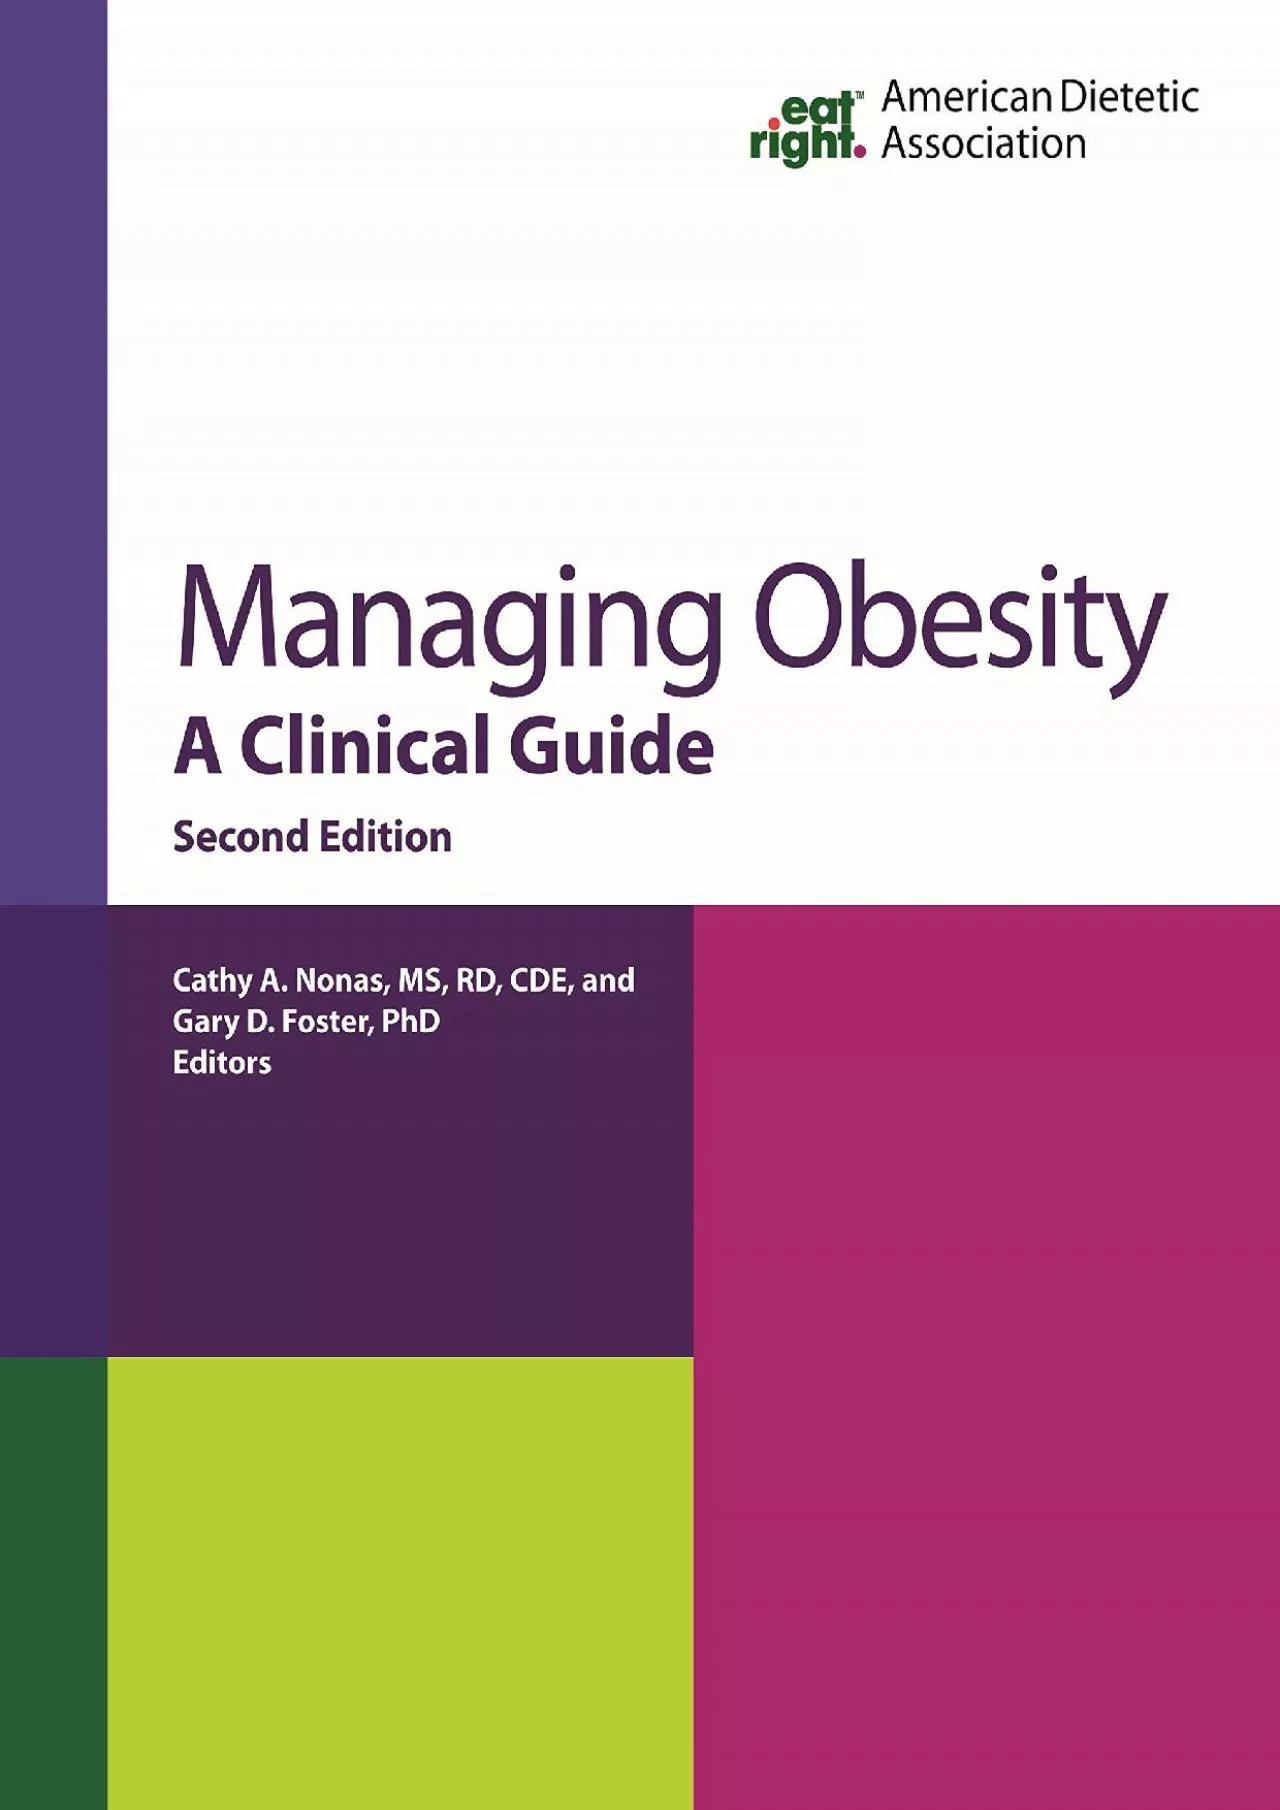 (BOOK)-Managing Obesity: A Clinical Guide, Second Edition